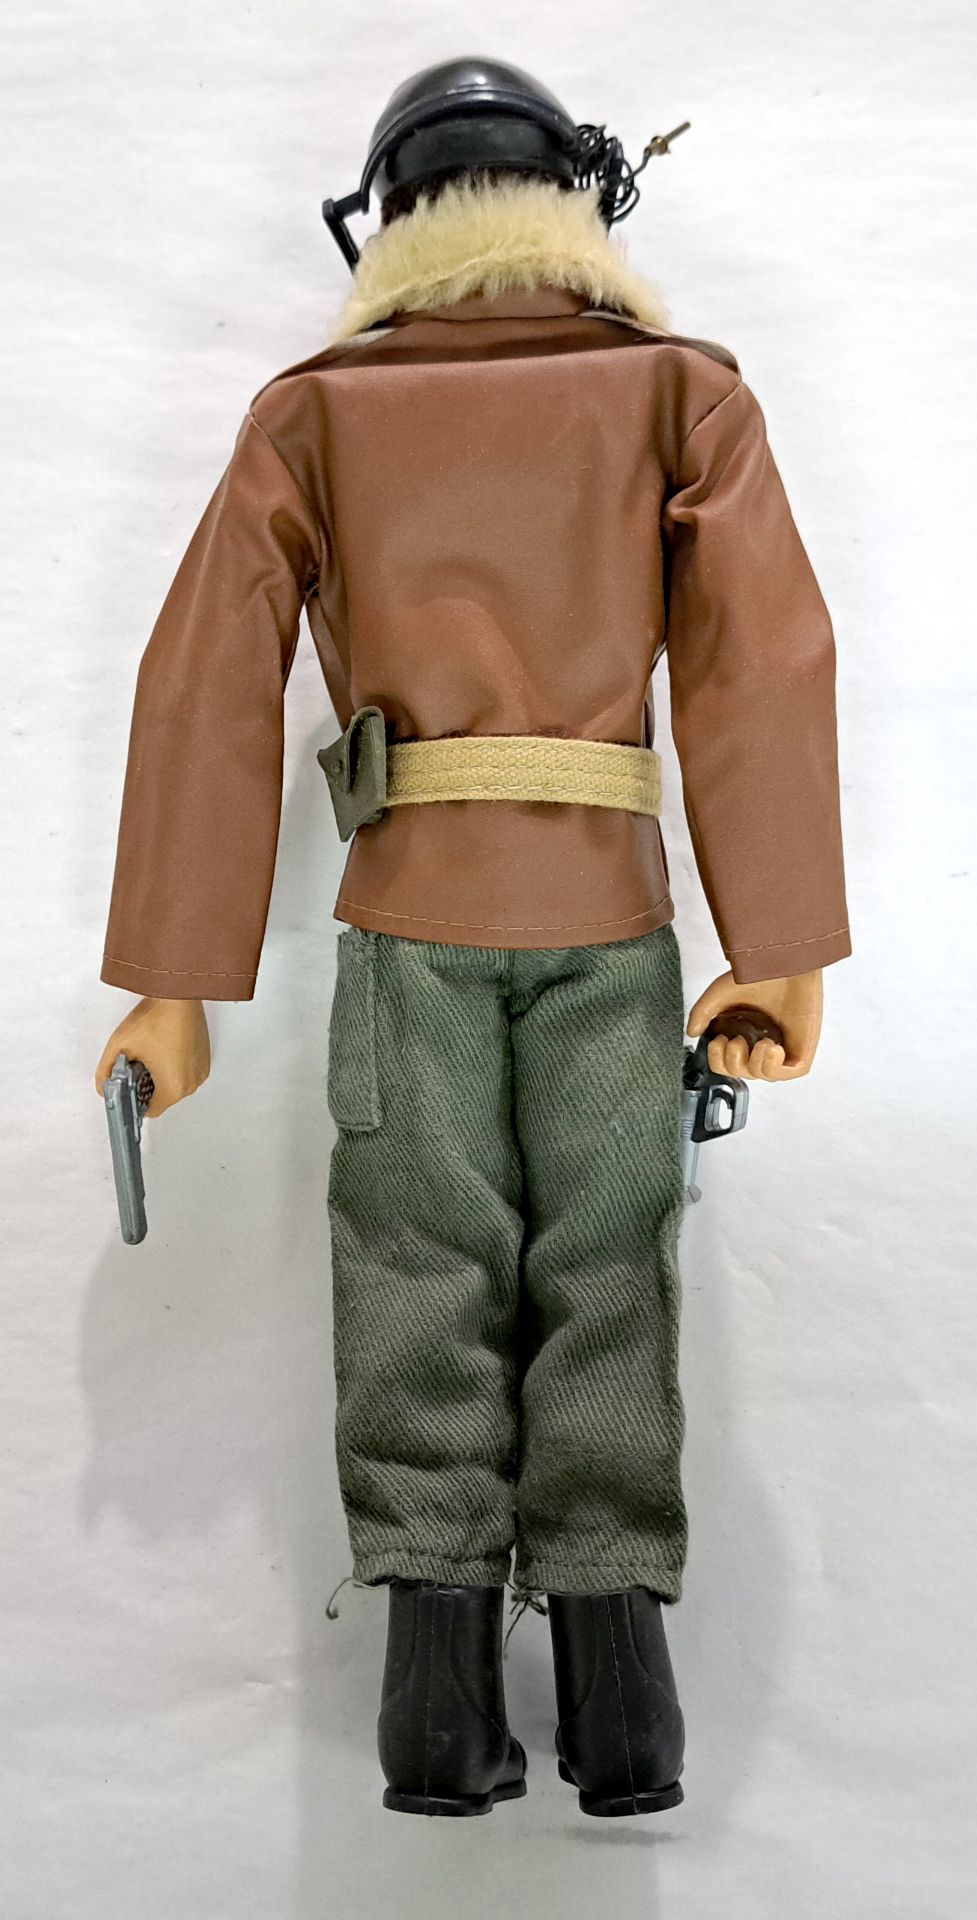 Palitoy Action Man Tank Commander, dark hair and beard, blue pants, eagle-eyes, gripping hands, w... - Image 2 of 2